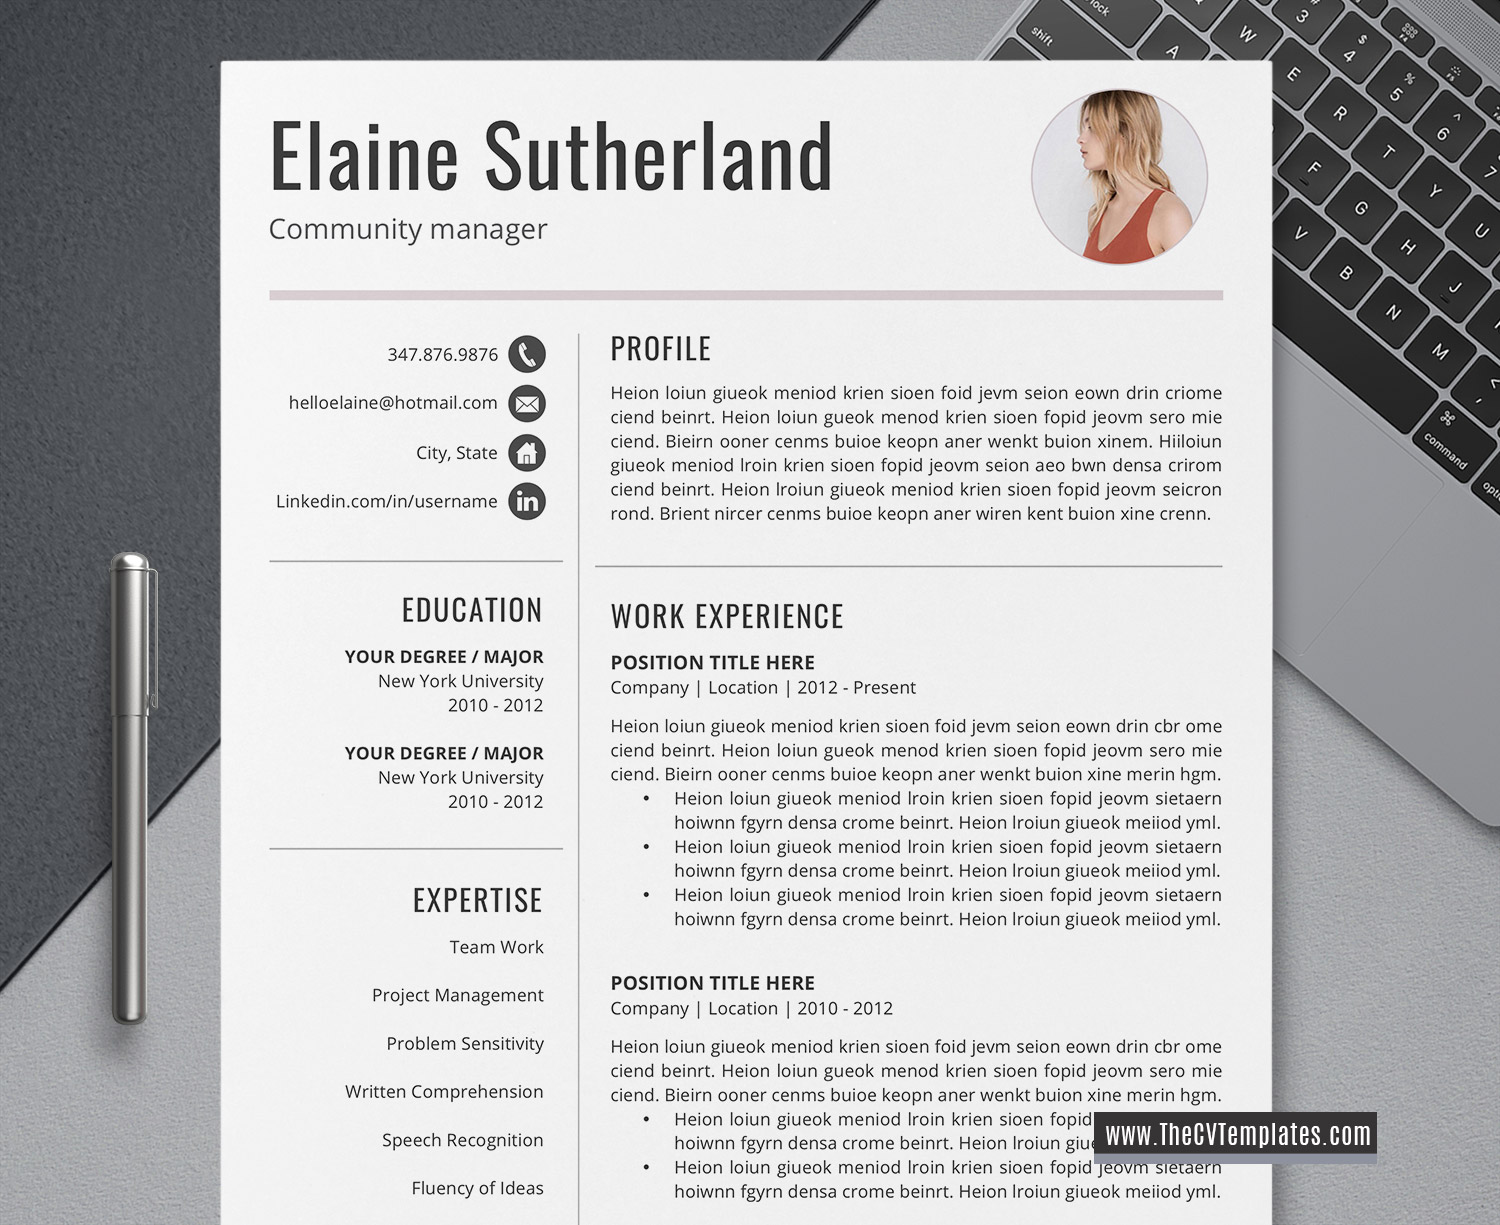 Minimal modern templates CV cover letter references Instant access to editable online apps TS01B Resume template Professional resume